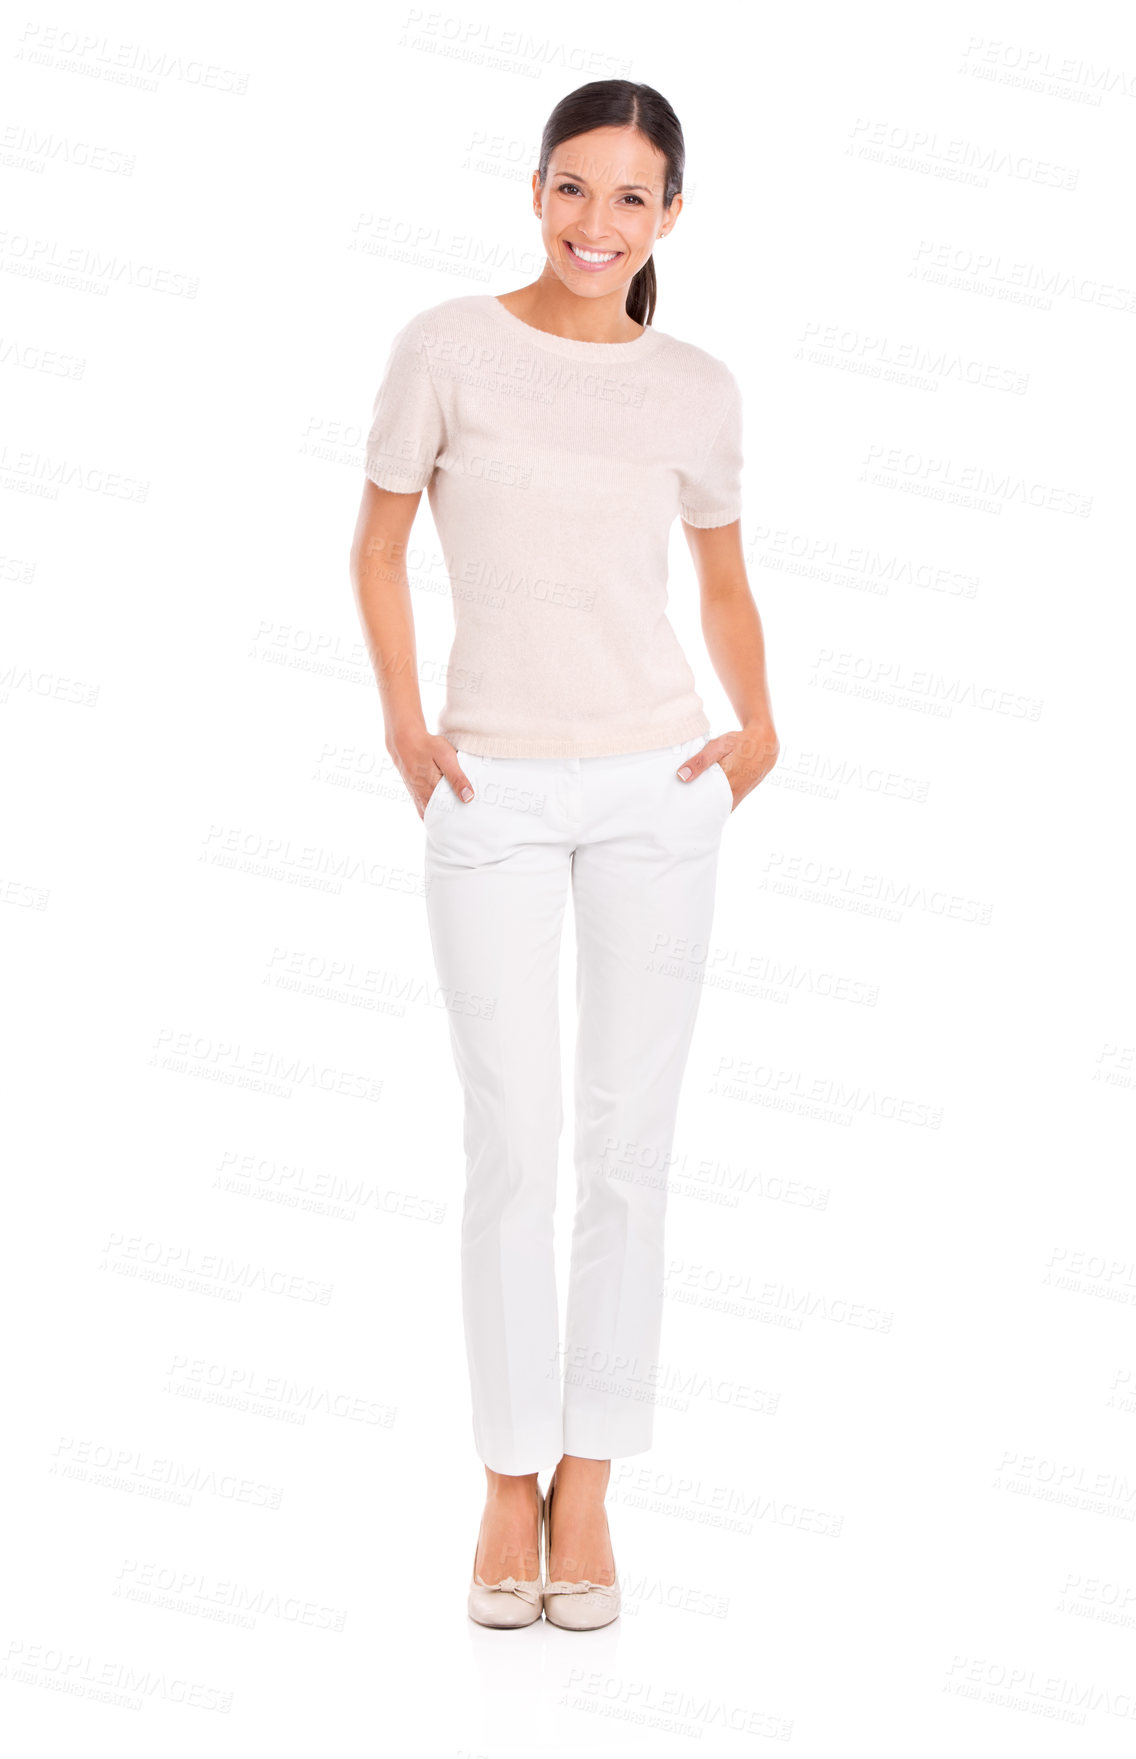 Buy stock photo Studio shot of a casually dressed young woman isolated on white